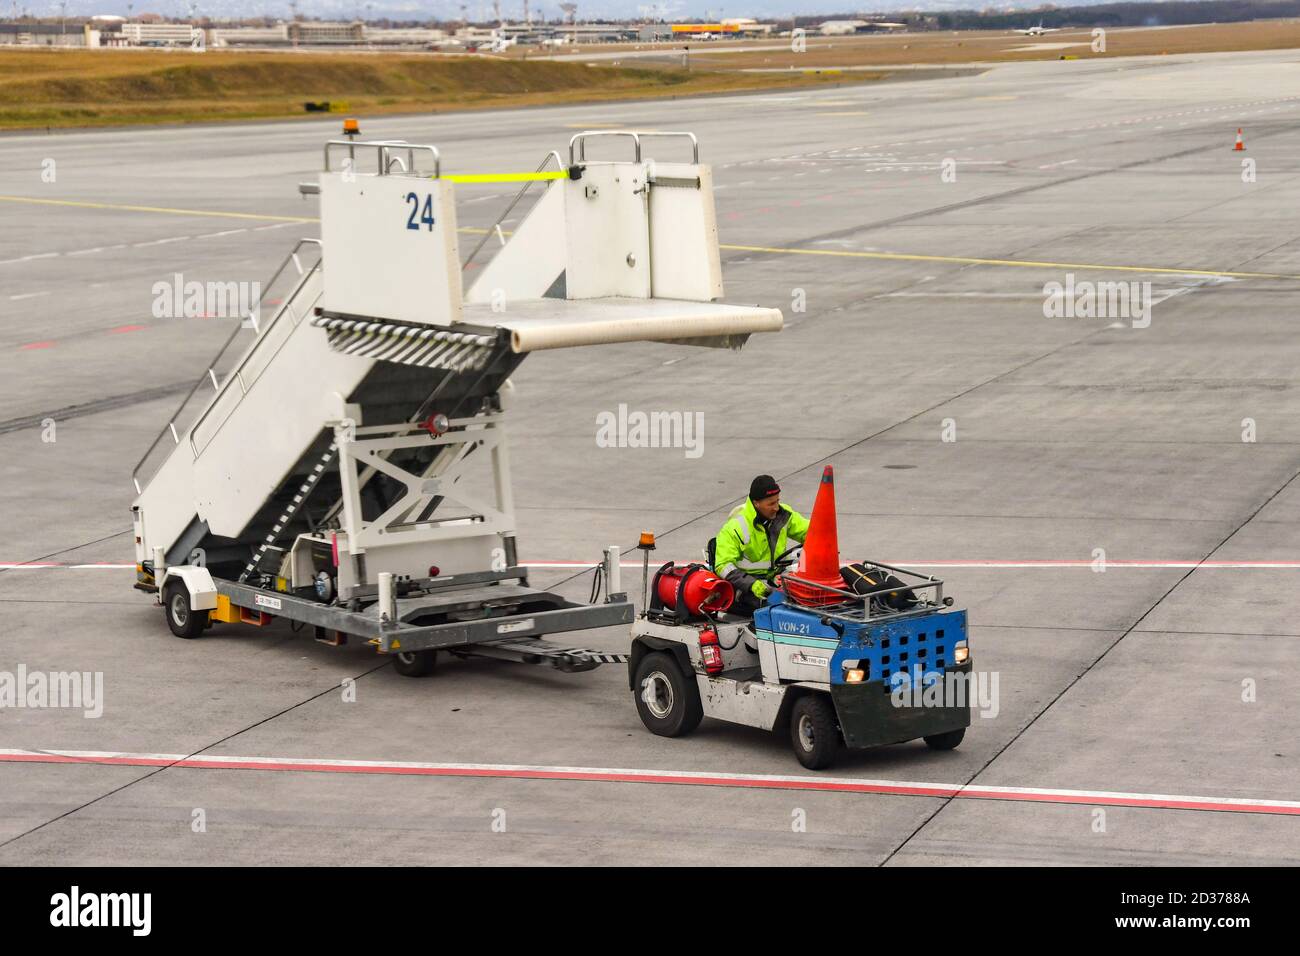 BUDAPEST, HUNGARY - MARCH 2019: Airport worker towing a set of passenger steps to an aircraft after its arrival in Budapest airport. Stock Photo